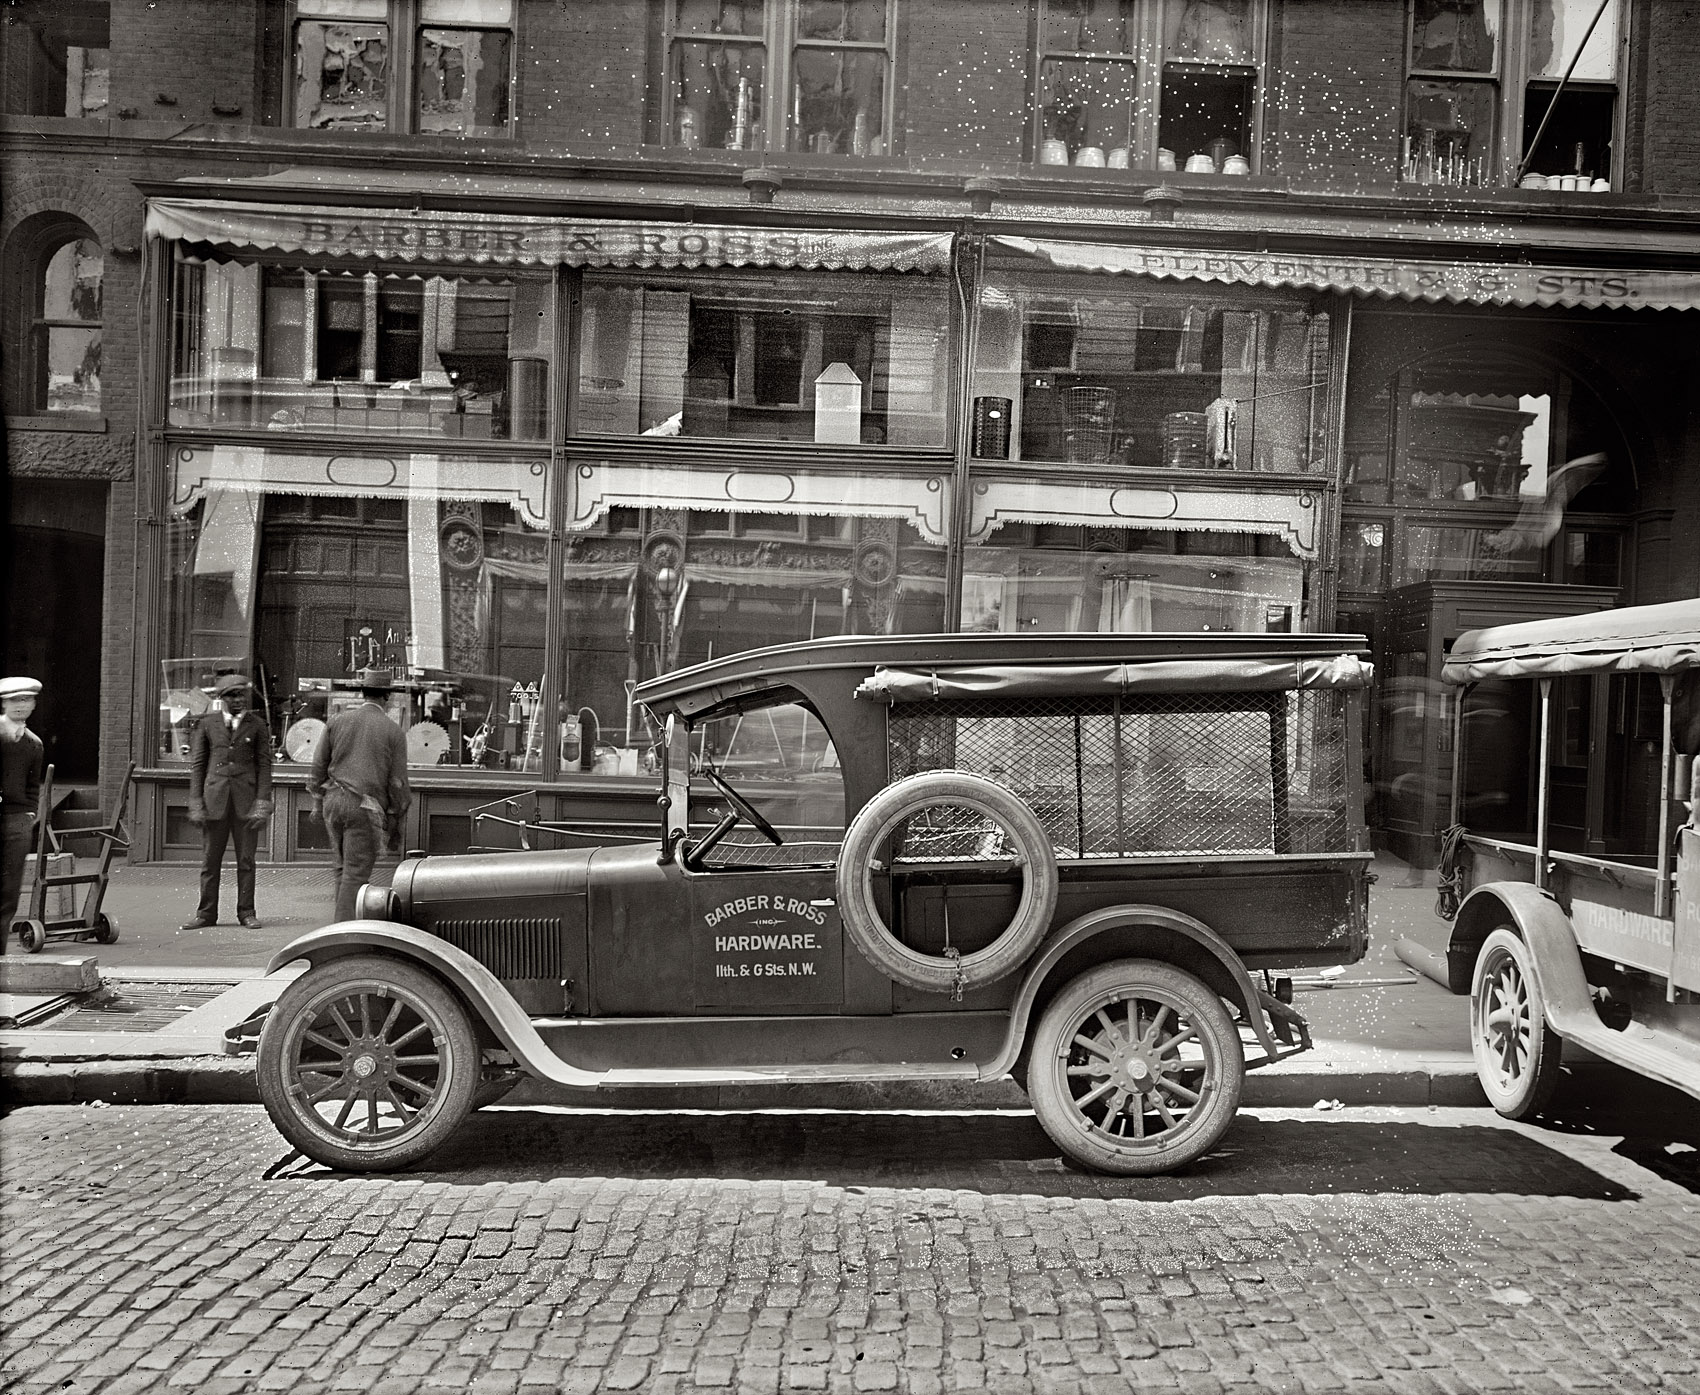 Washington, D.C., 1926. "Semmes Motor Company. Barber & Ross truck." National Photo Company Collection glass negative. View full size.